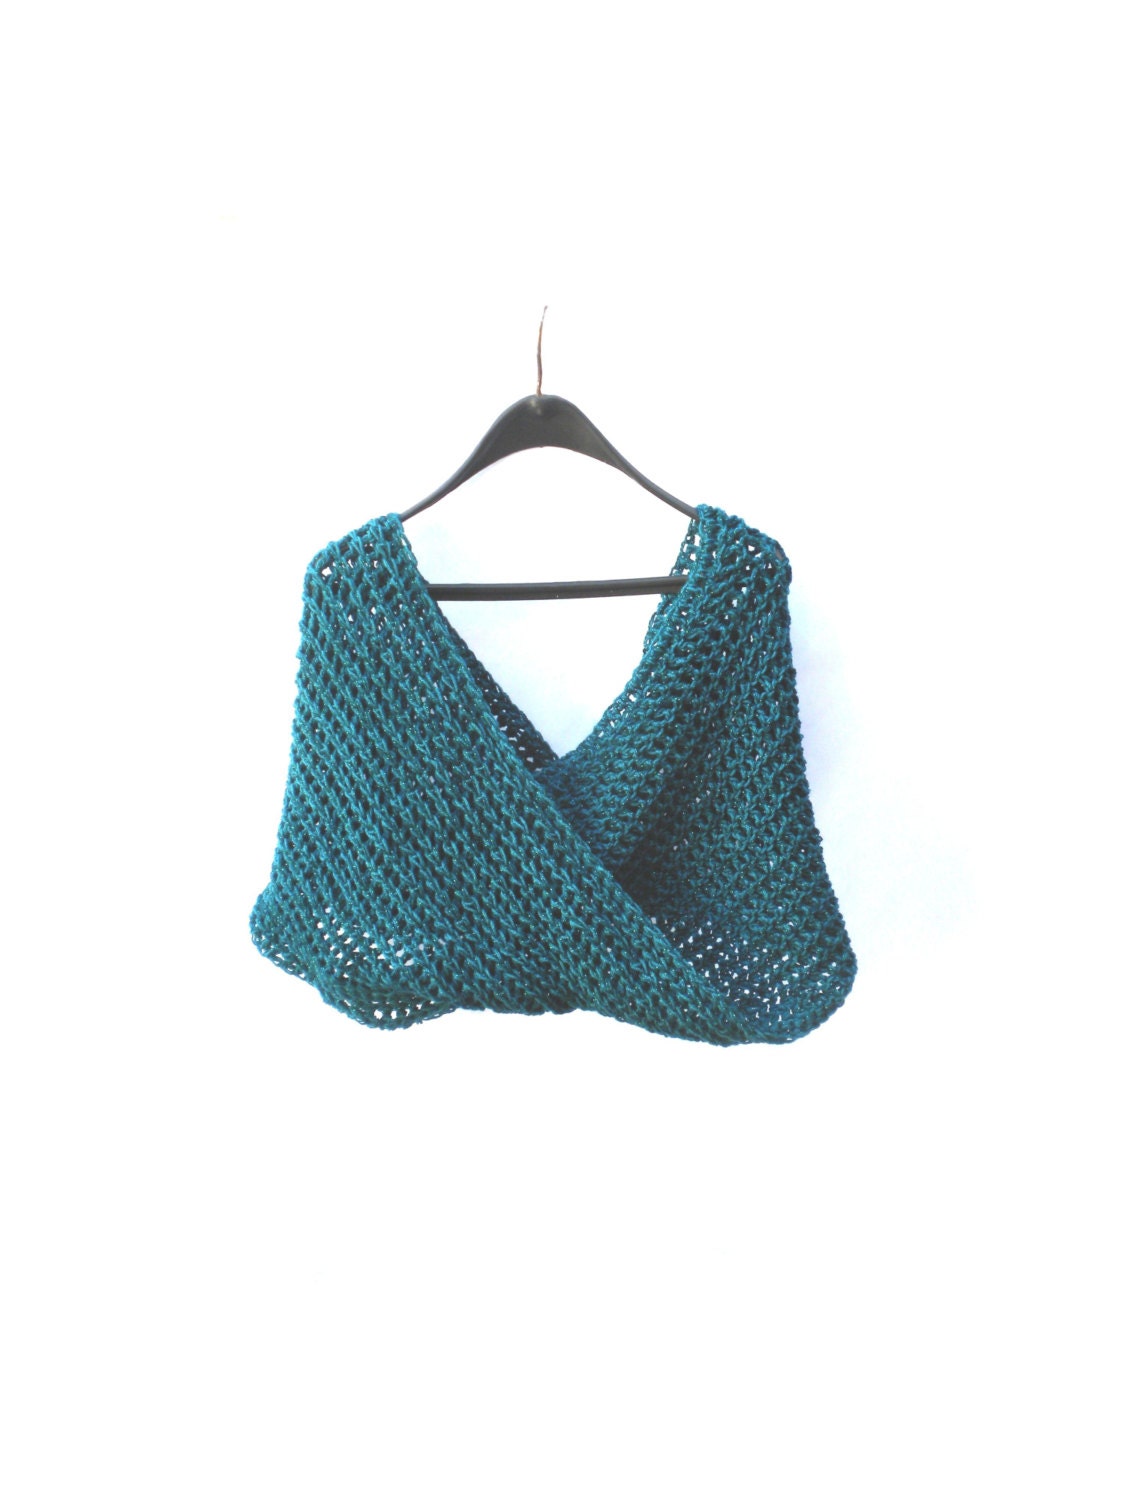 Pippi's TEAL Chunky Infinity Scarf, with SPARKLES, Double Wrap, Crochet, Valentines Gifts, For Her, Winter Fashion, Womens, Warm, Cozy - pippisLongstockings